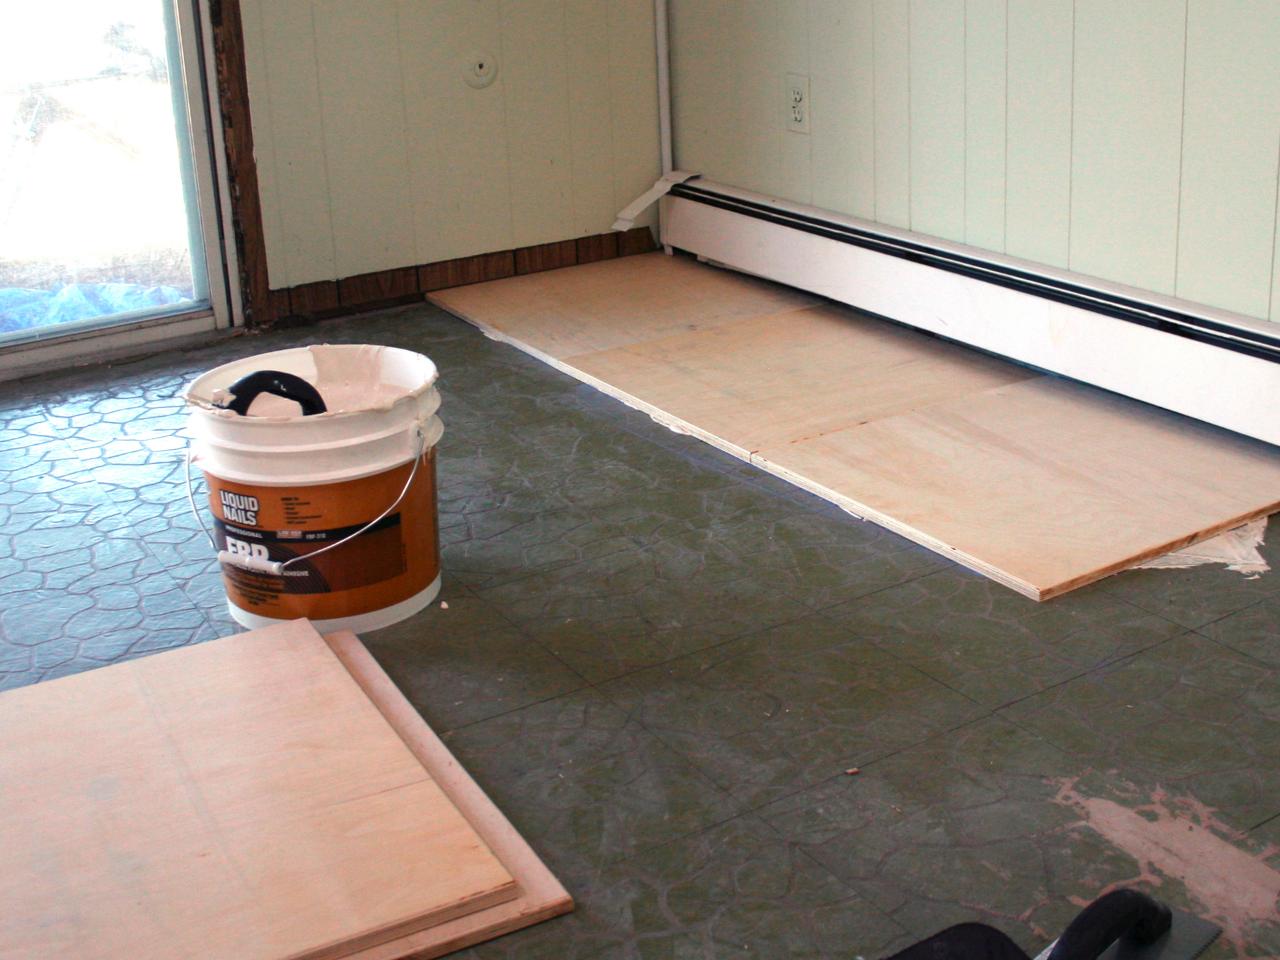 How To Install Plywood Floor Tiles, How To Install Wood Tile